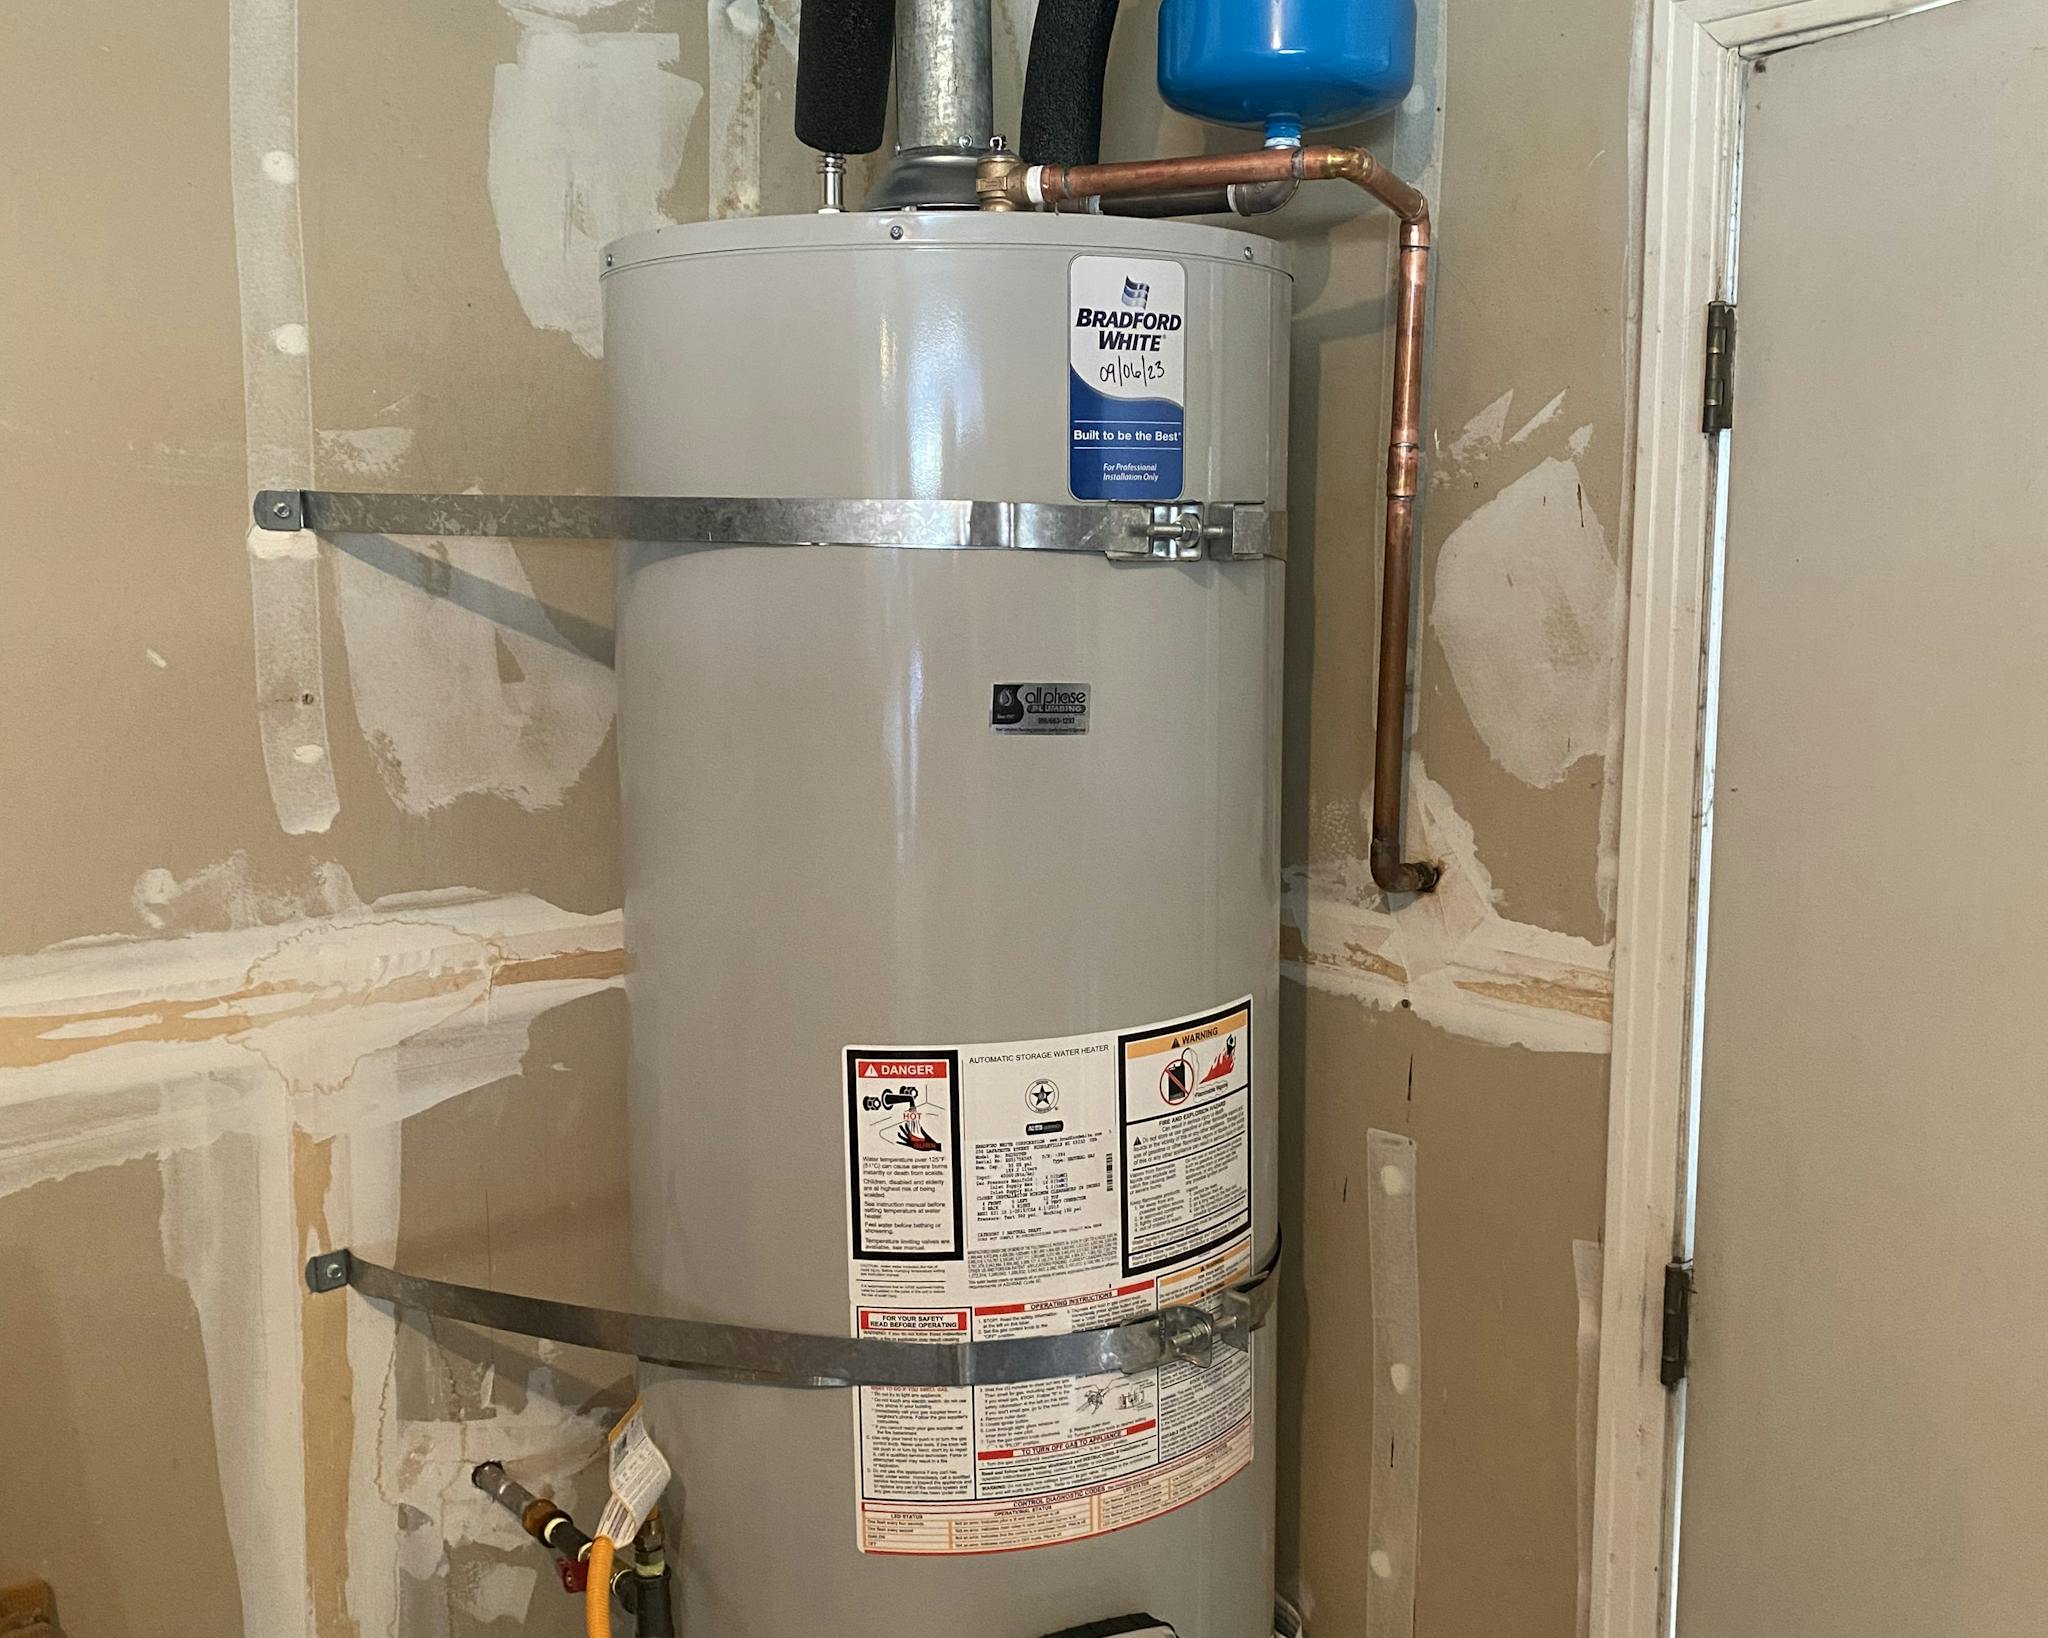 A large cylindrical 'Bradford White' water heater mounted against a wall with unfinished patchwork. The heater has a gray exterior with labels and safety instructions printed on it. Copper piping is visible at the top, and a small blue expansion tank is attached. A yellow valve handle can be seen near the bottom.